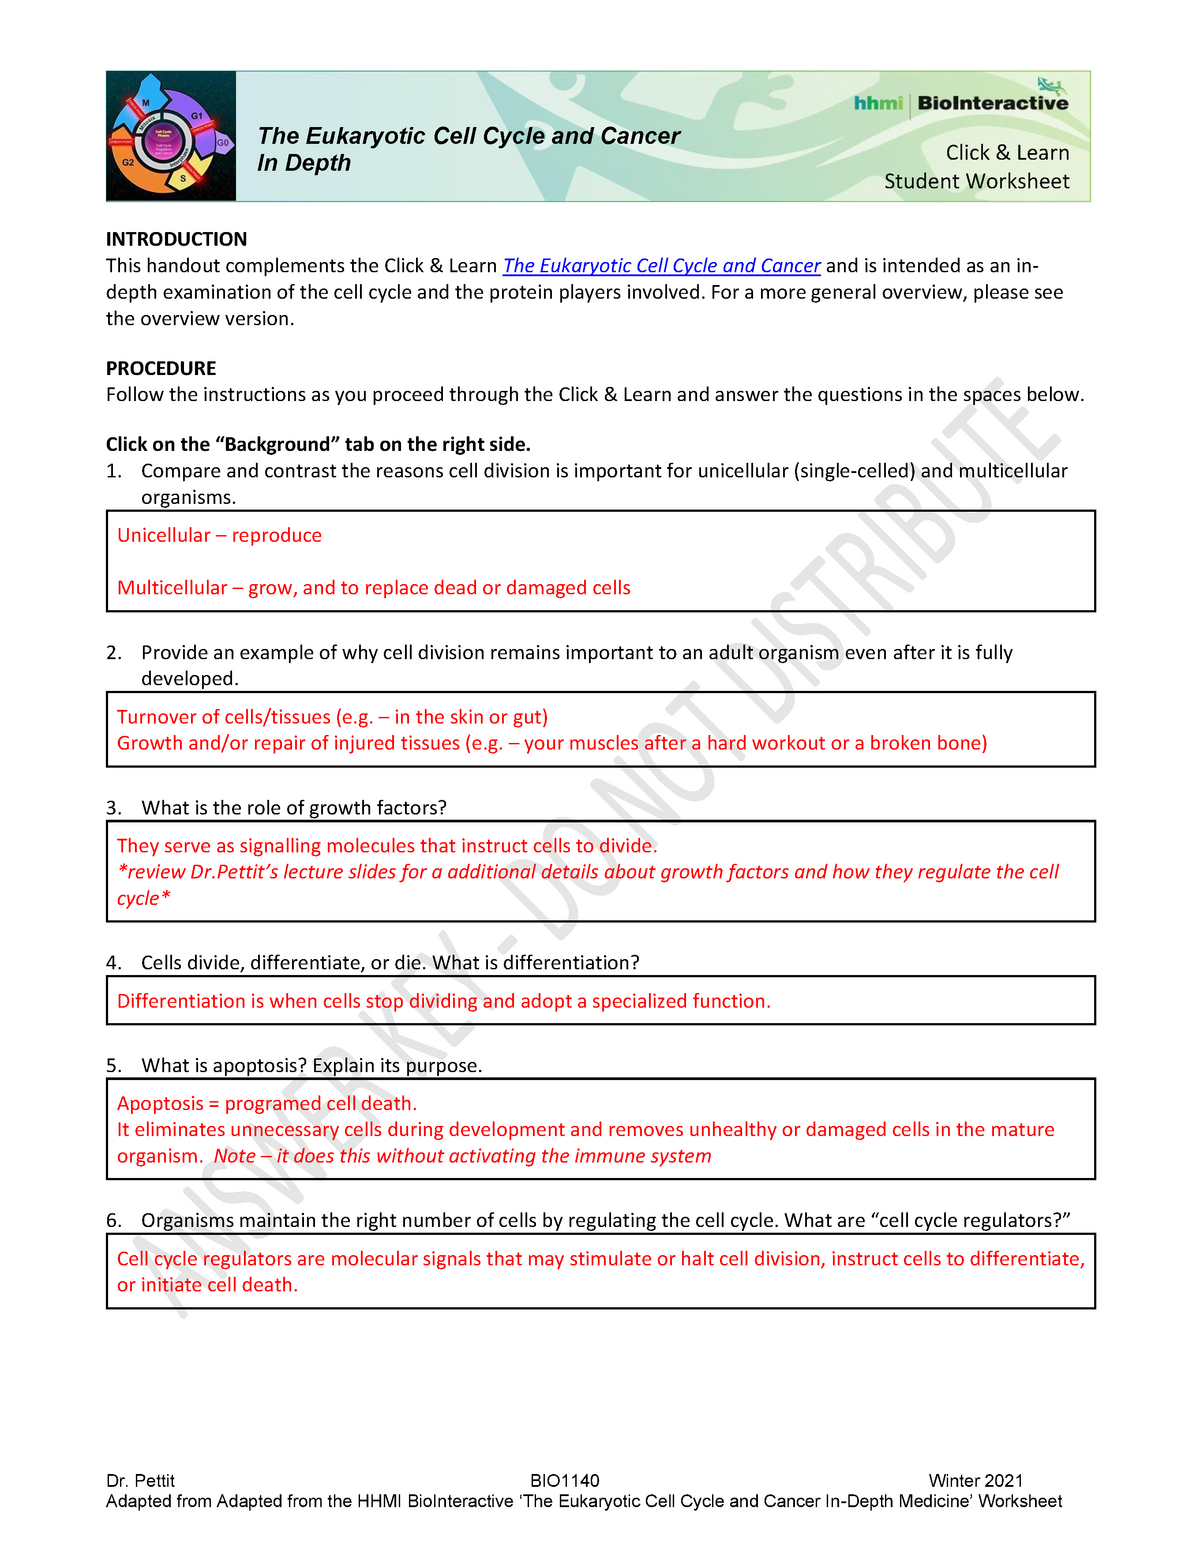 topic-6-eukaryotic-cell-cycle-and-cancer-exploration-worksheet-answer